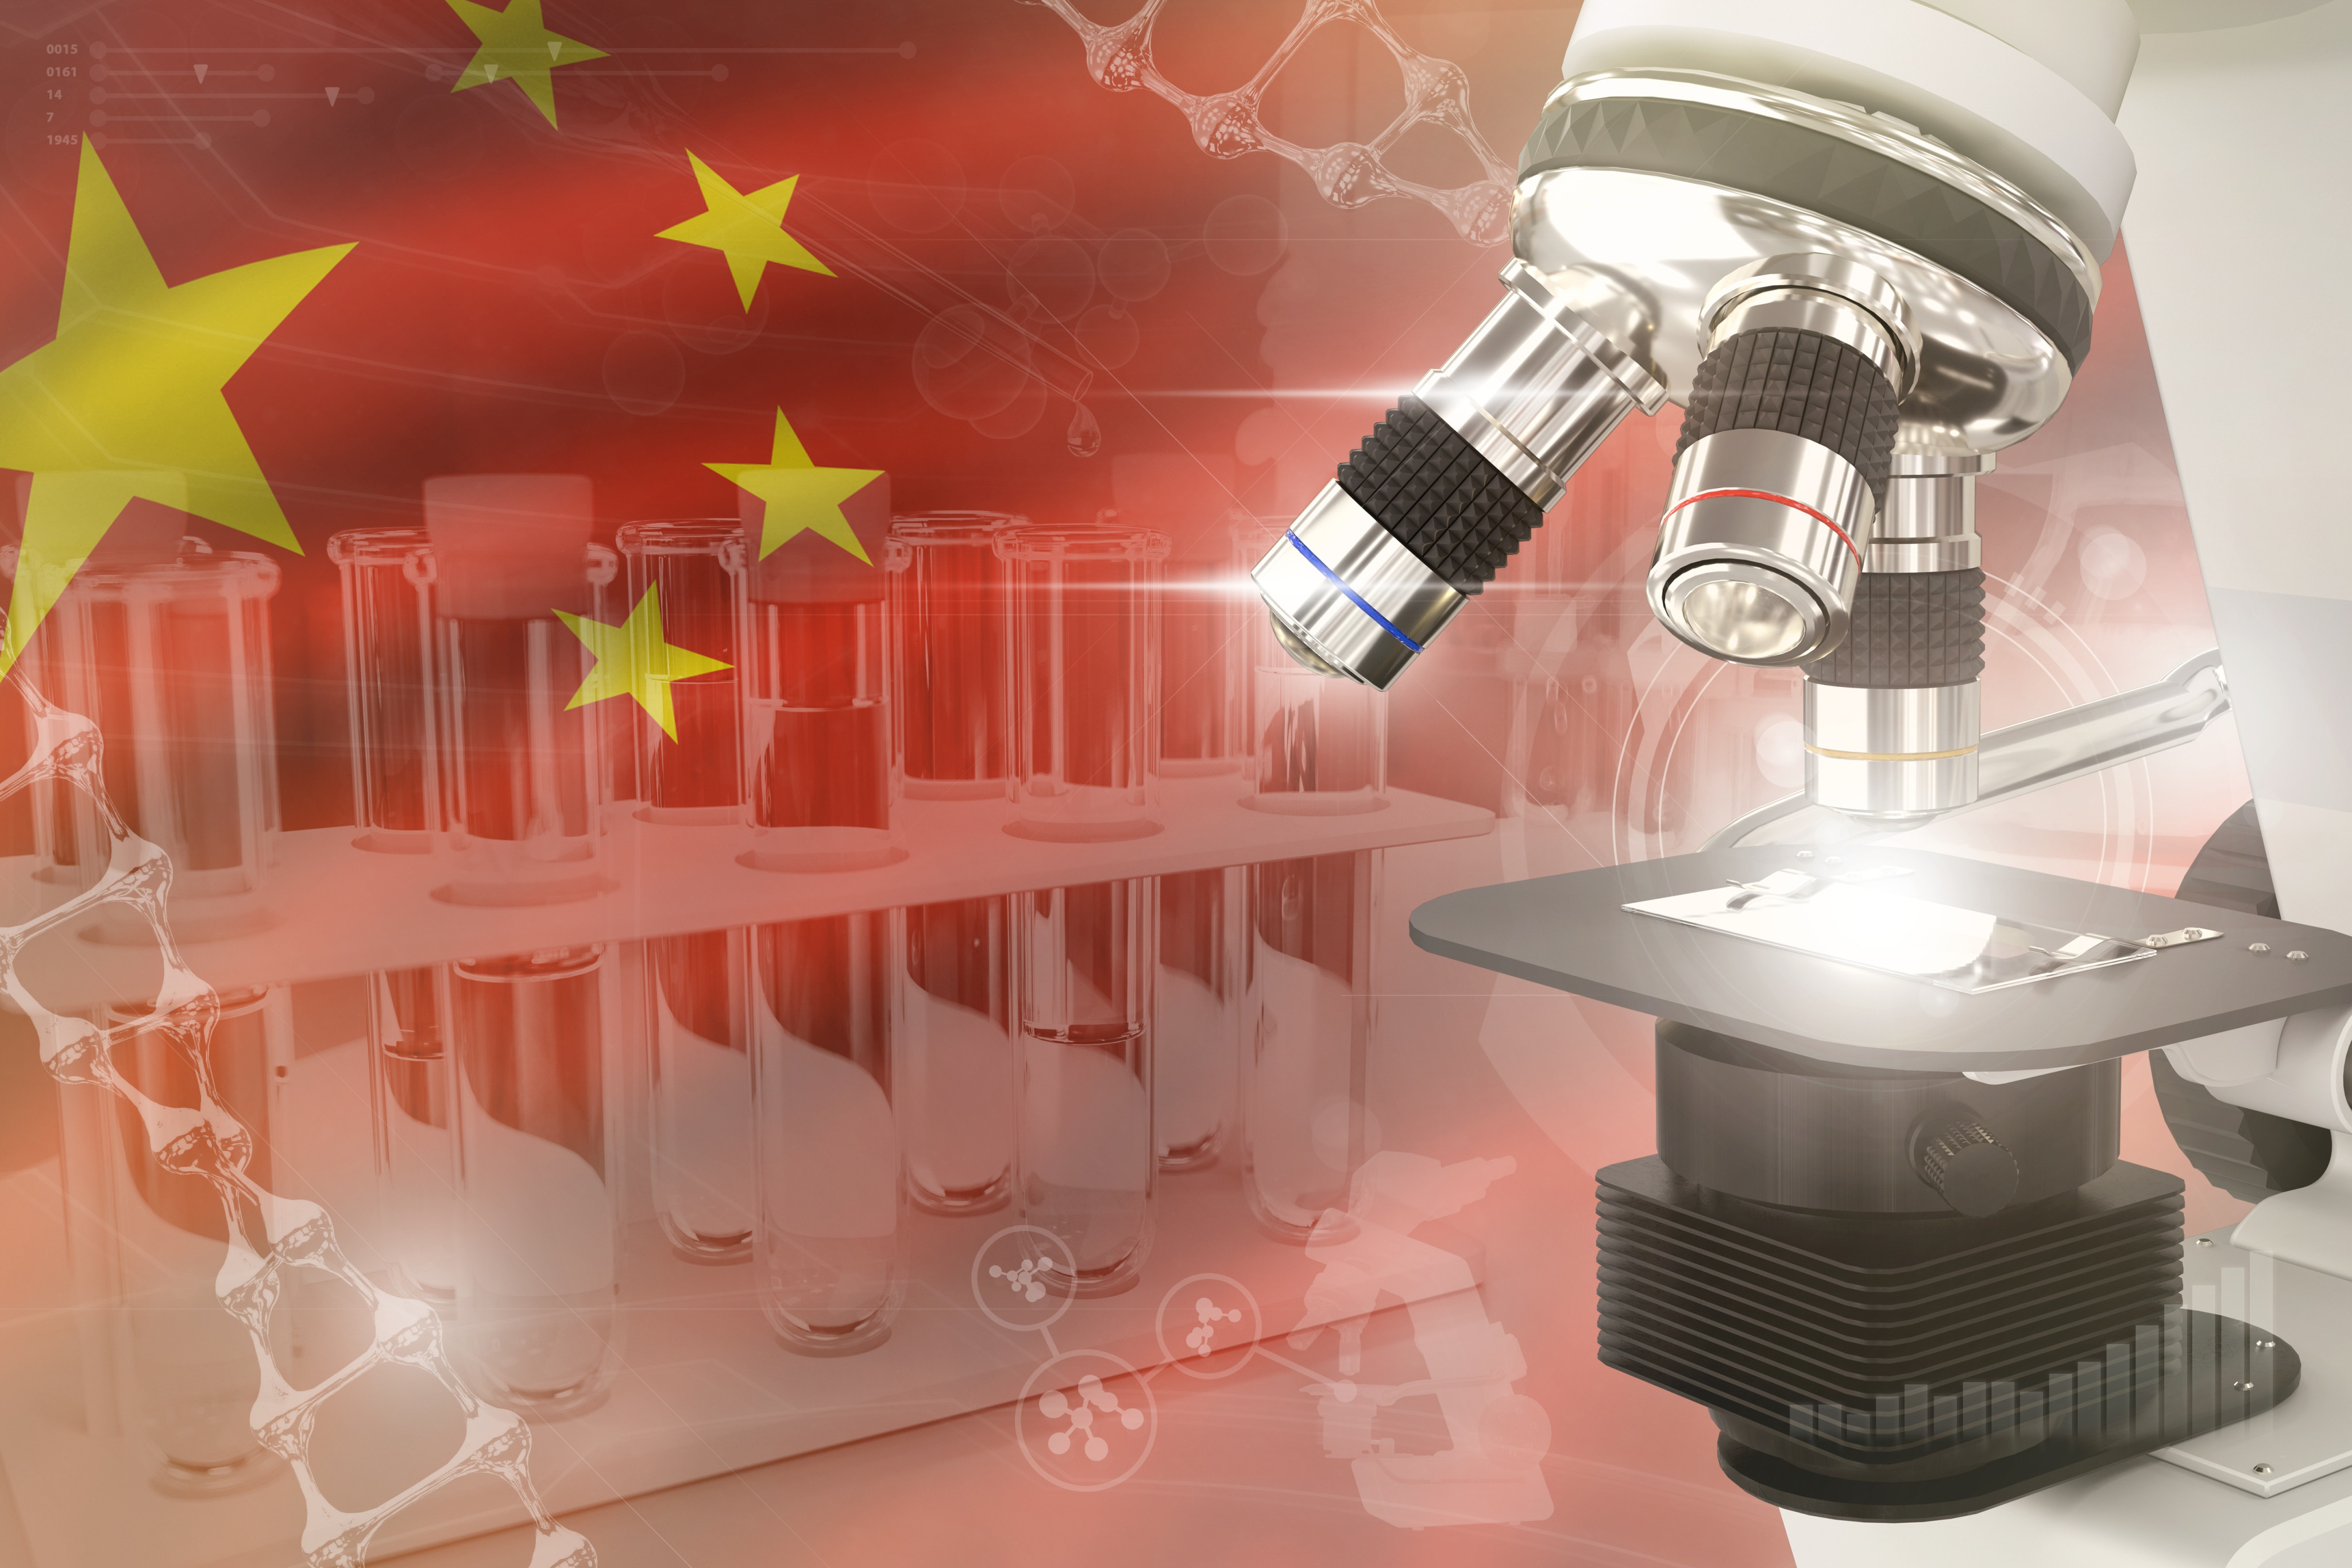 A total of 32 cities in mainland China appear on the 2023 “Leading 200 Science Cities” list compiled by the journal Nature. Photo: Shutterstock
